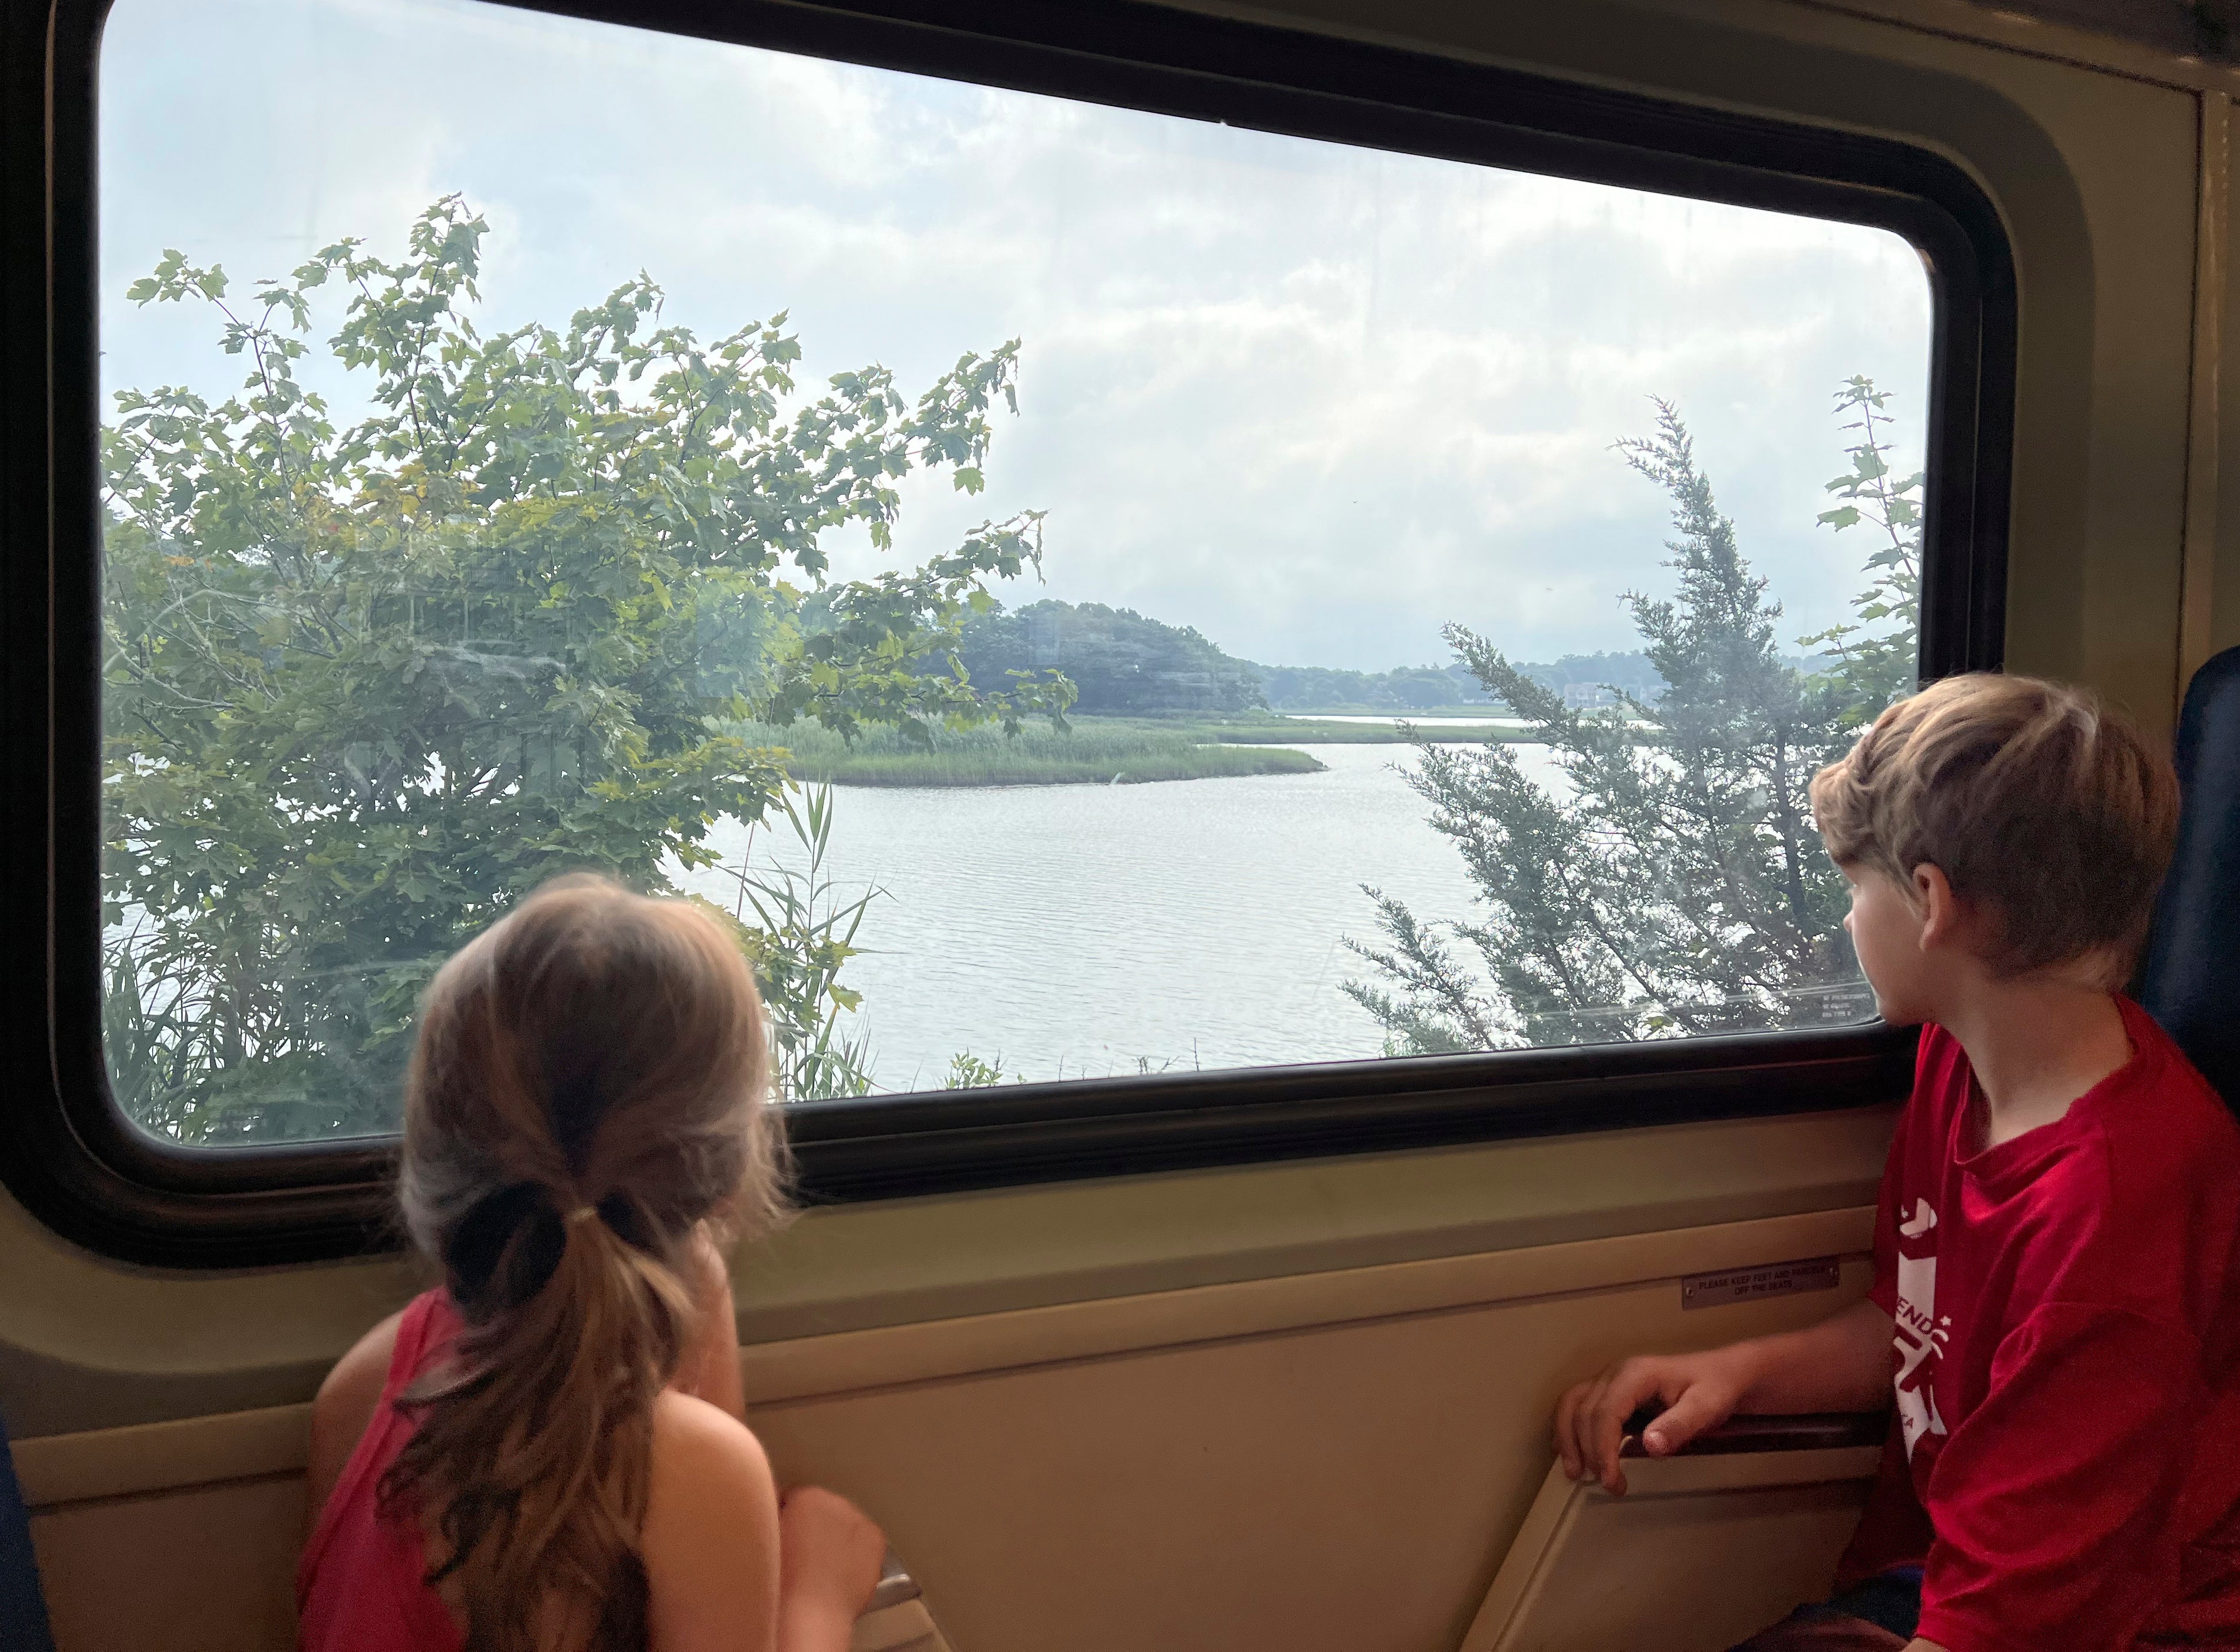 Boston to Cape Cod train makes weekend trips easier for vacationers